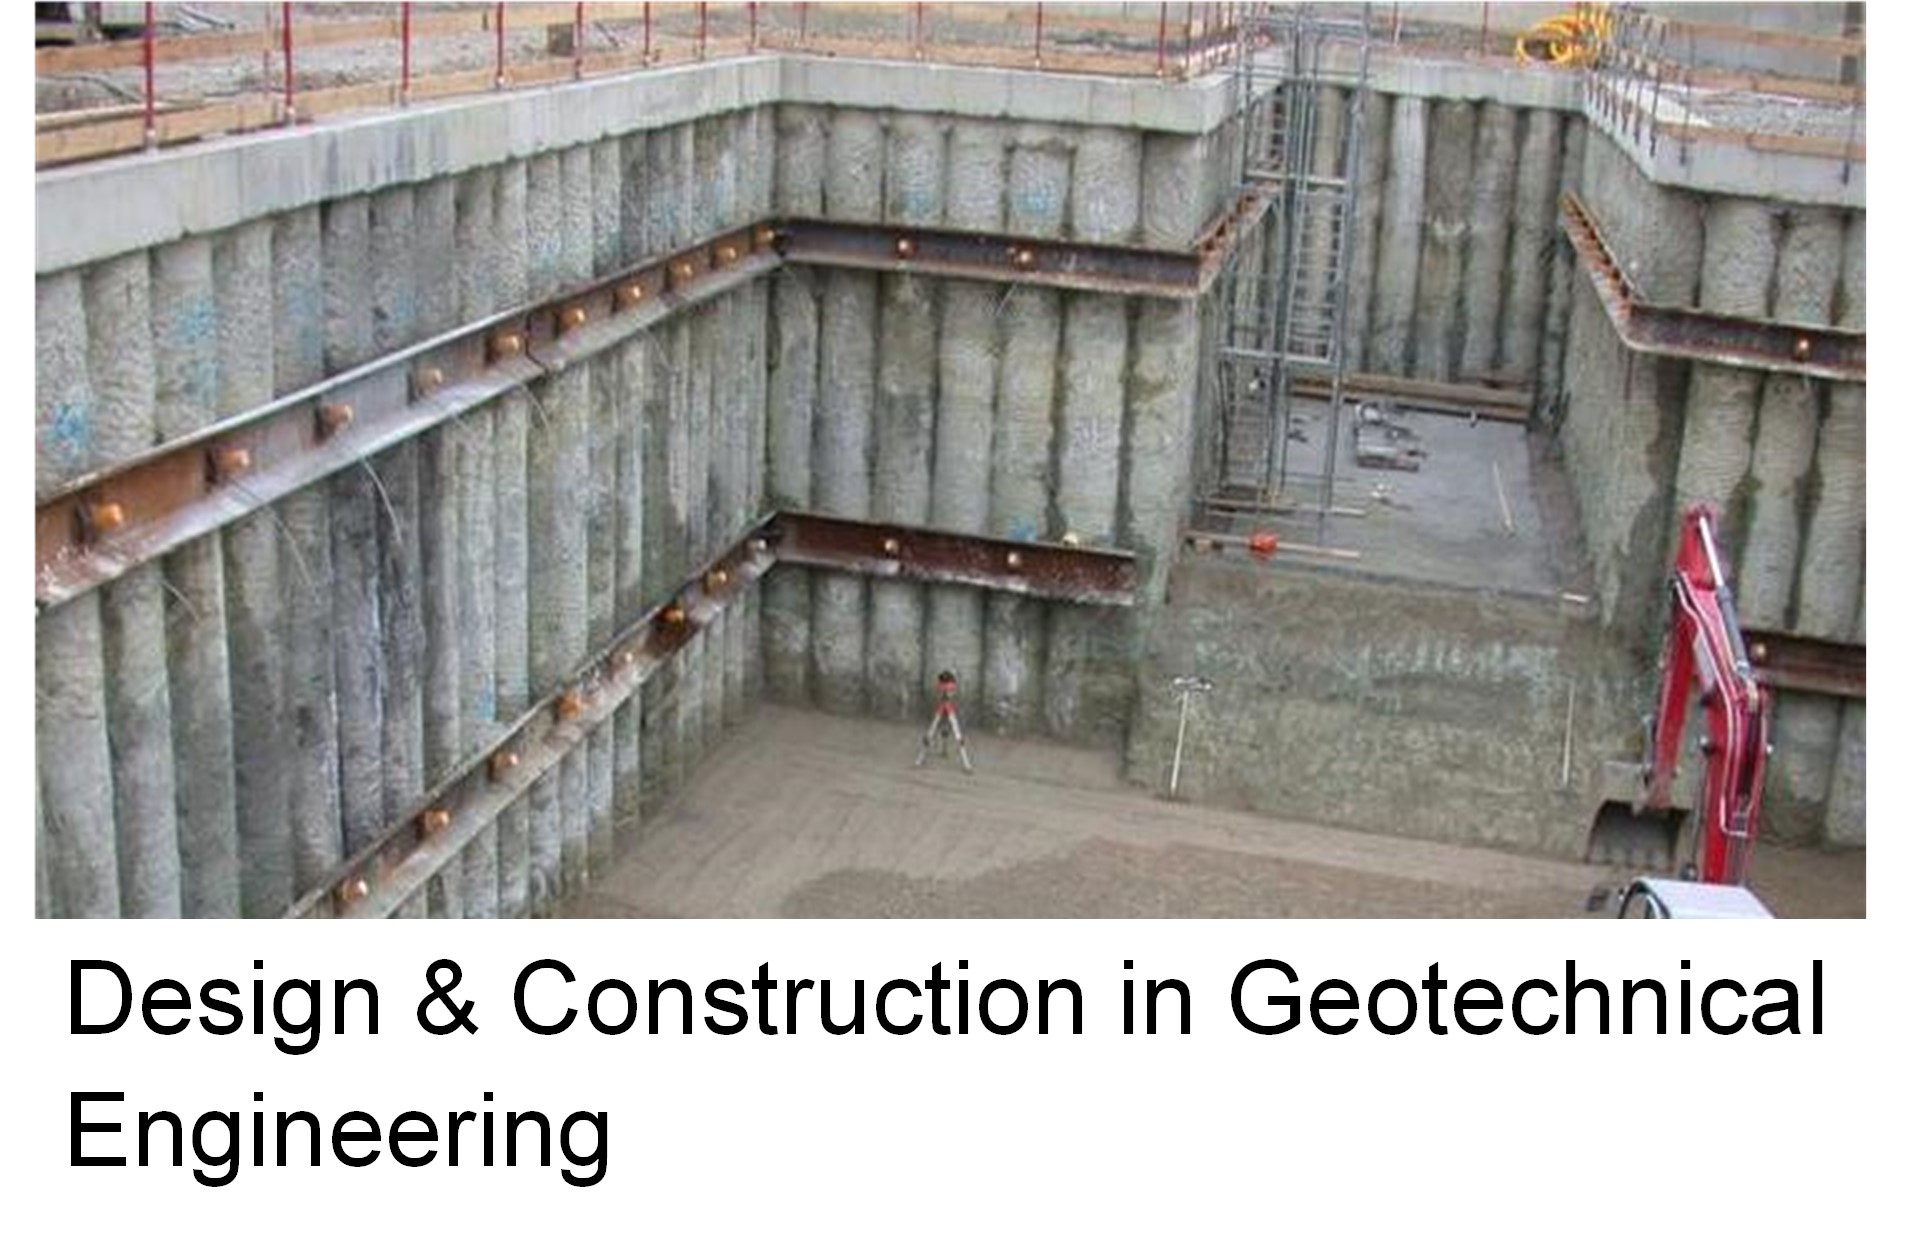 Design & Construction in Geotechnical Engineering